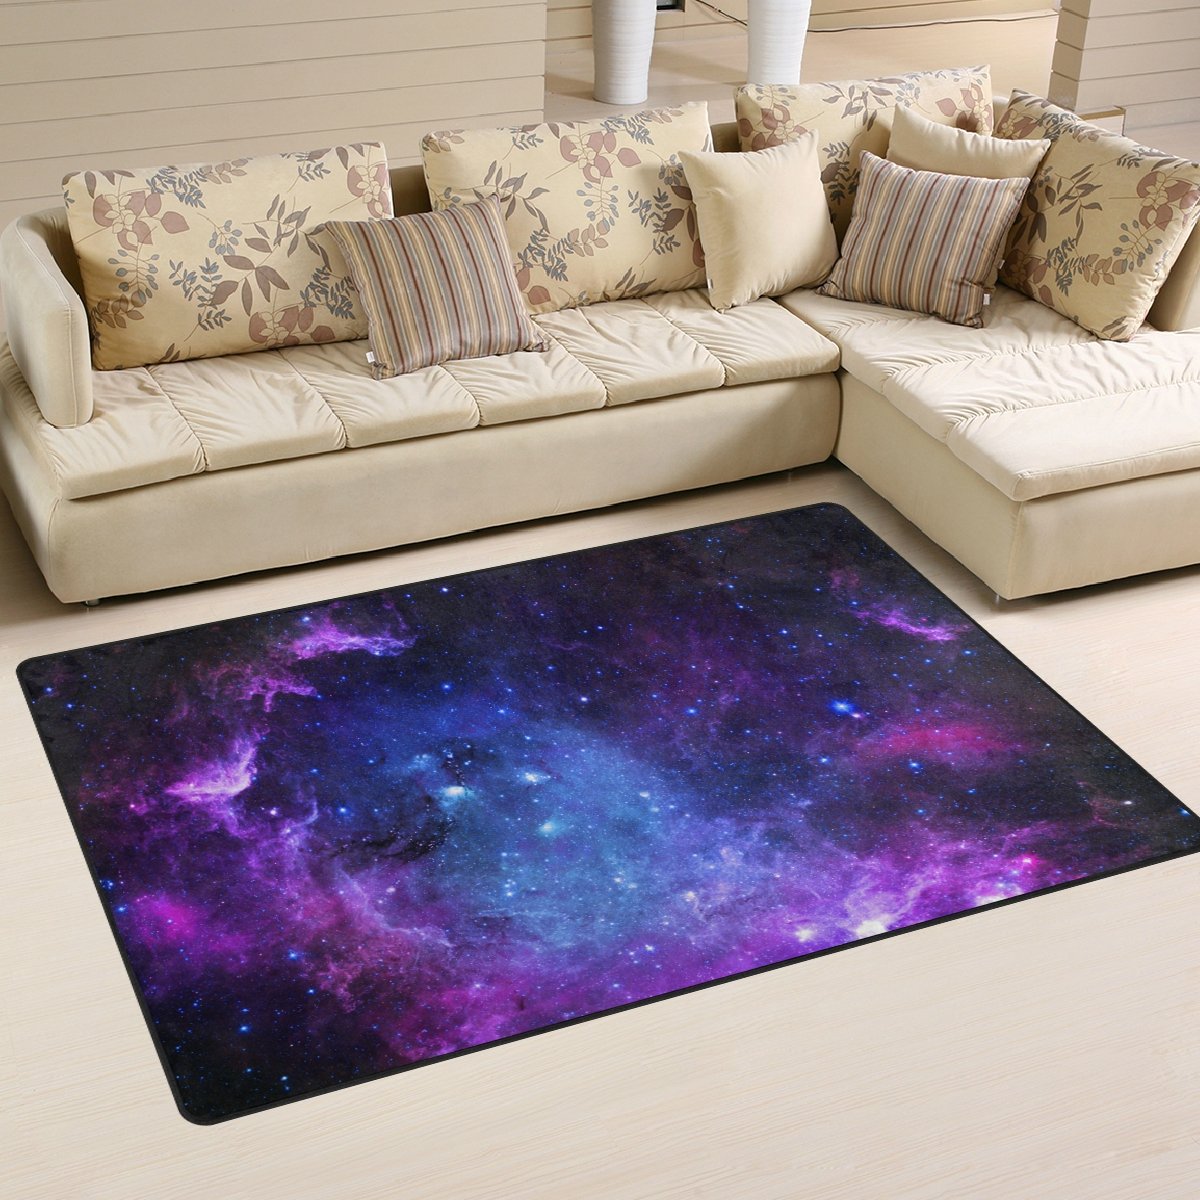 Book Cover Yochoice Non-Slip Area Rugs Home Decor, Vintage Beautiful Spiral Purple Galaxy Space Floor Mat Living Room Bedroom Carpets Doormats 60 x 39 inches 5'x3'3